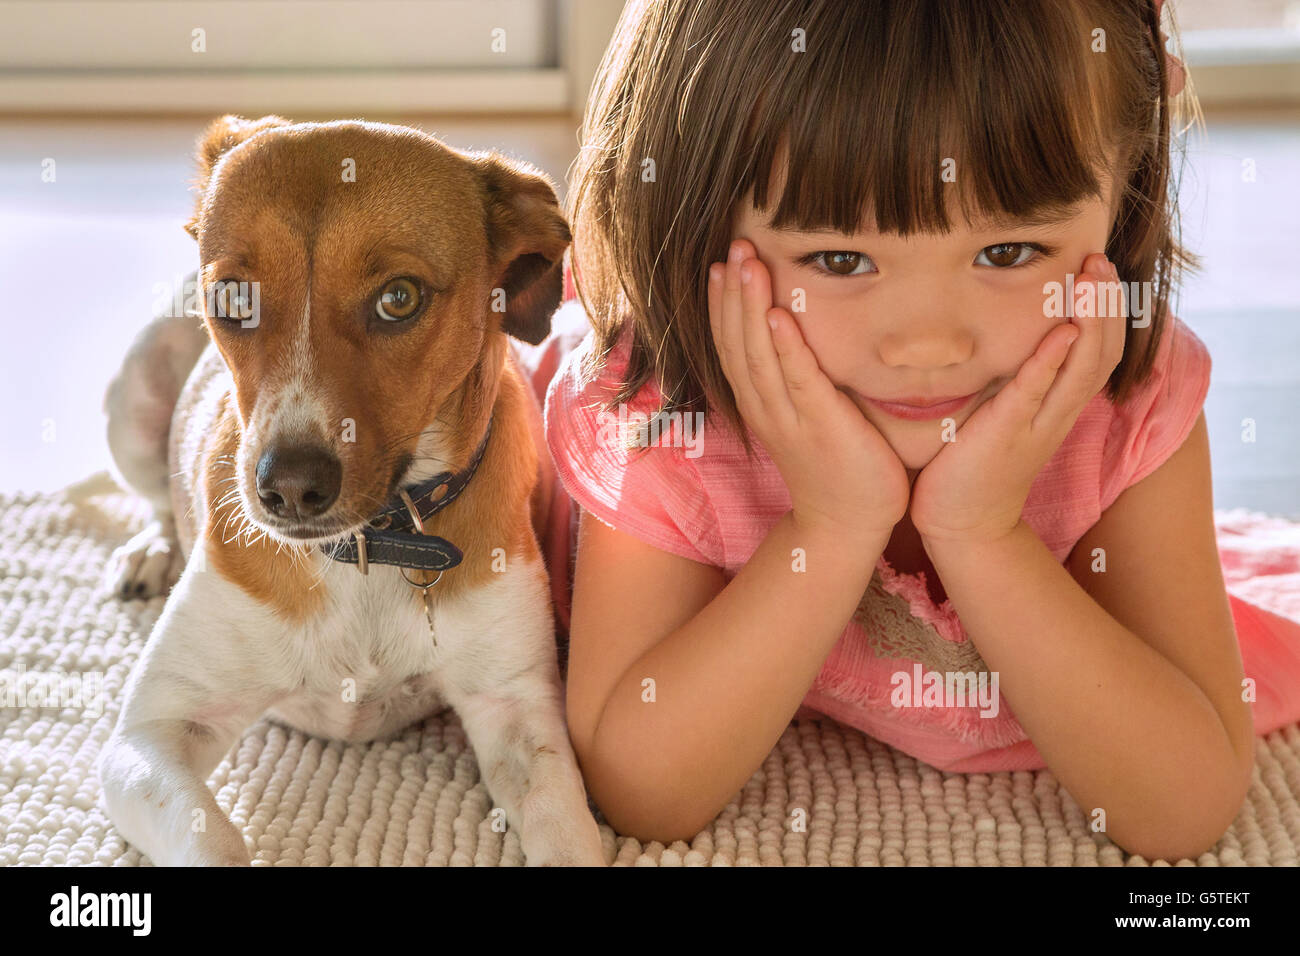 A toddler girl sitting with her sweet puppy pet Stock Photo